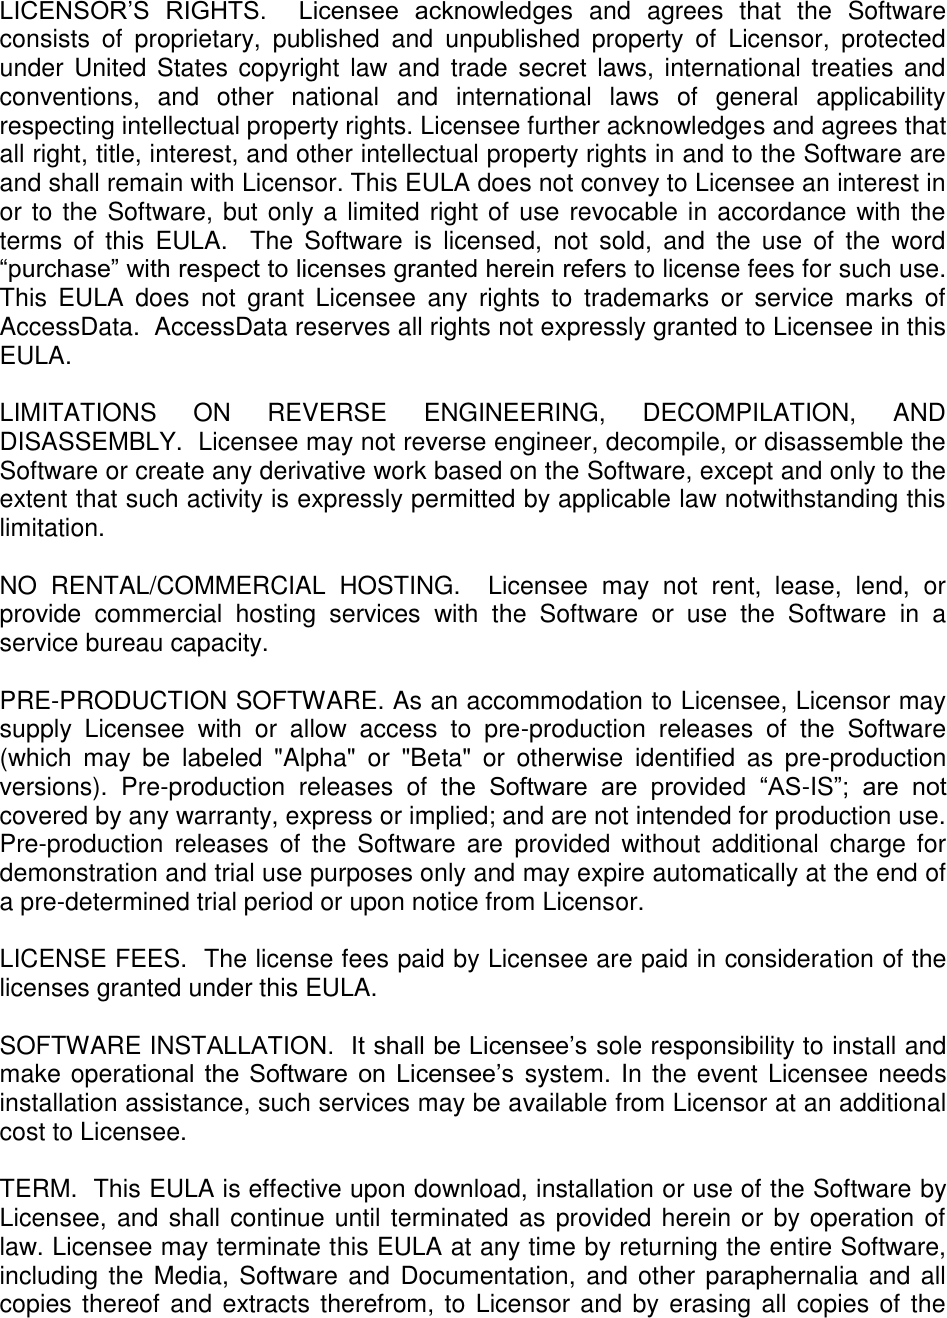 Page 3 of 7 - End User Agreement